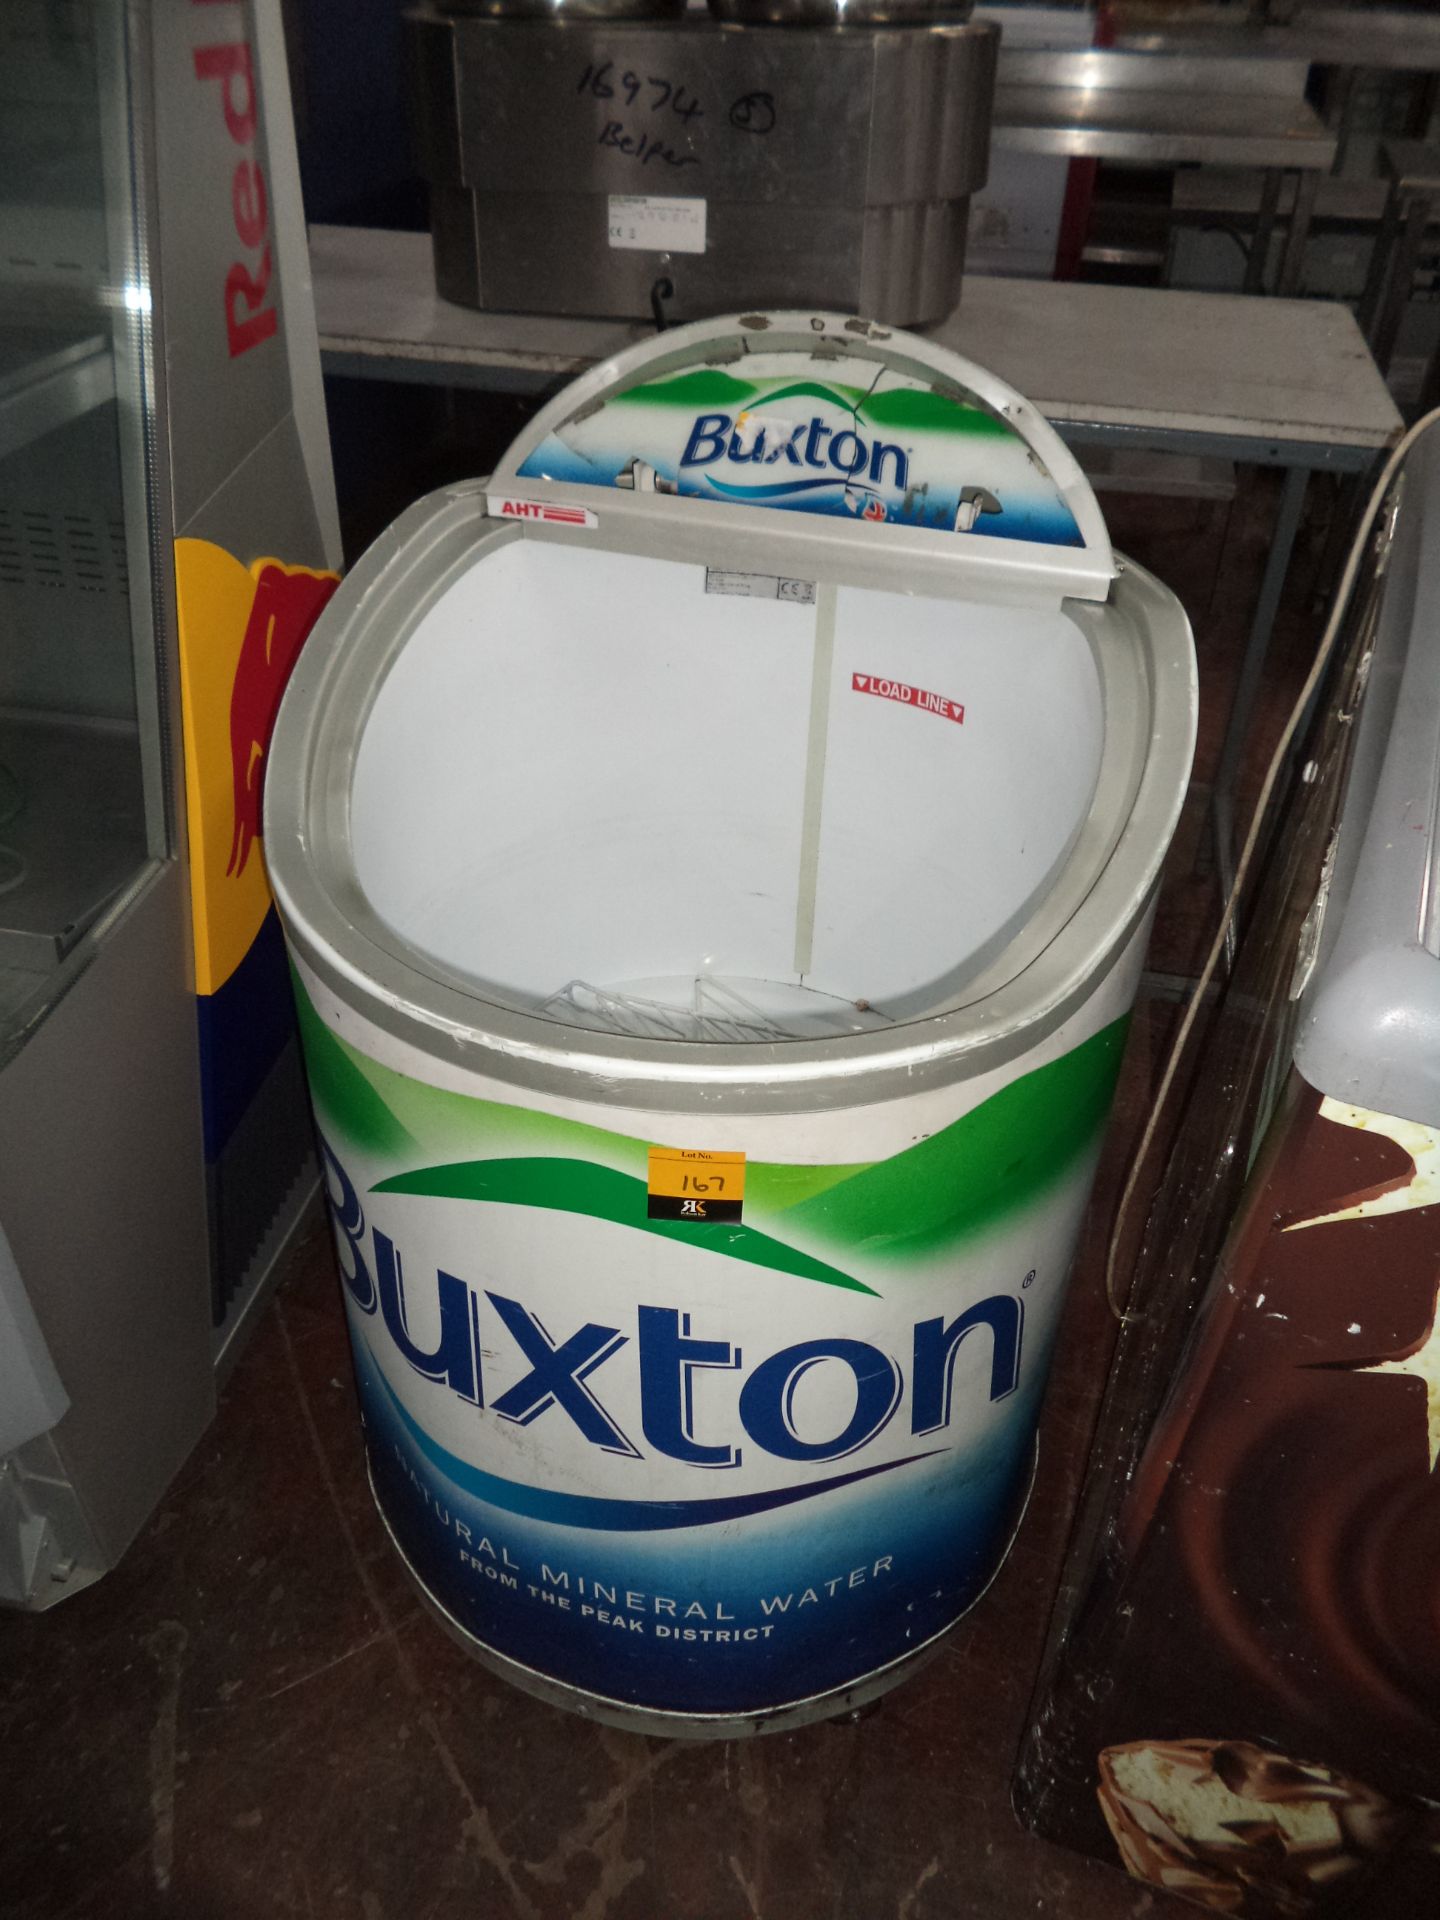 Buxton branded water dispensing cooler IMPORTANT: Please remember goods successfully bid upon must